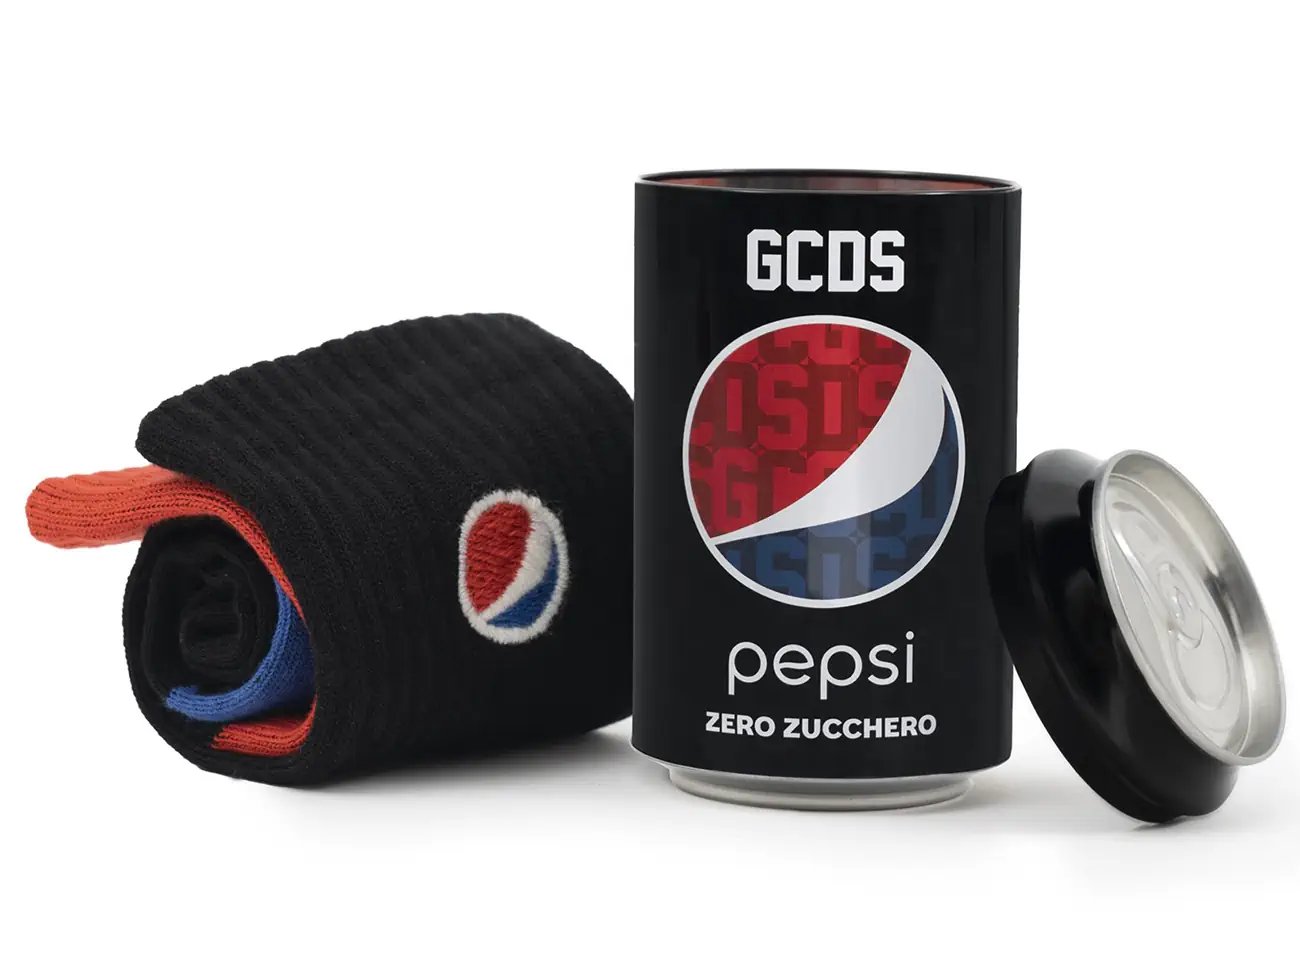 GCDS x Pepsi, a fusion of fashion and beverage industry